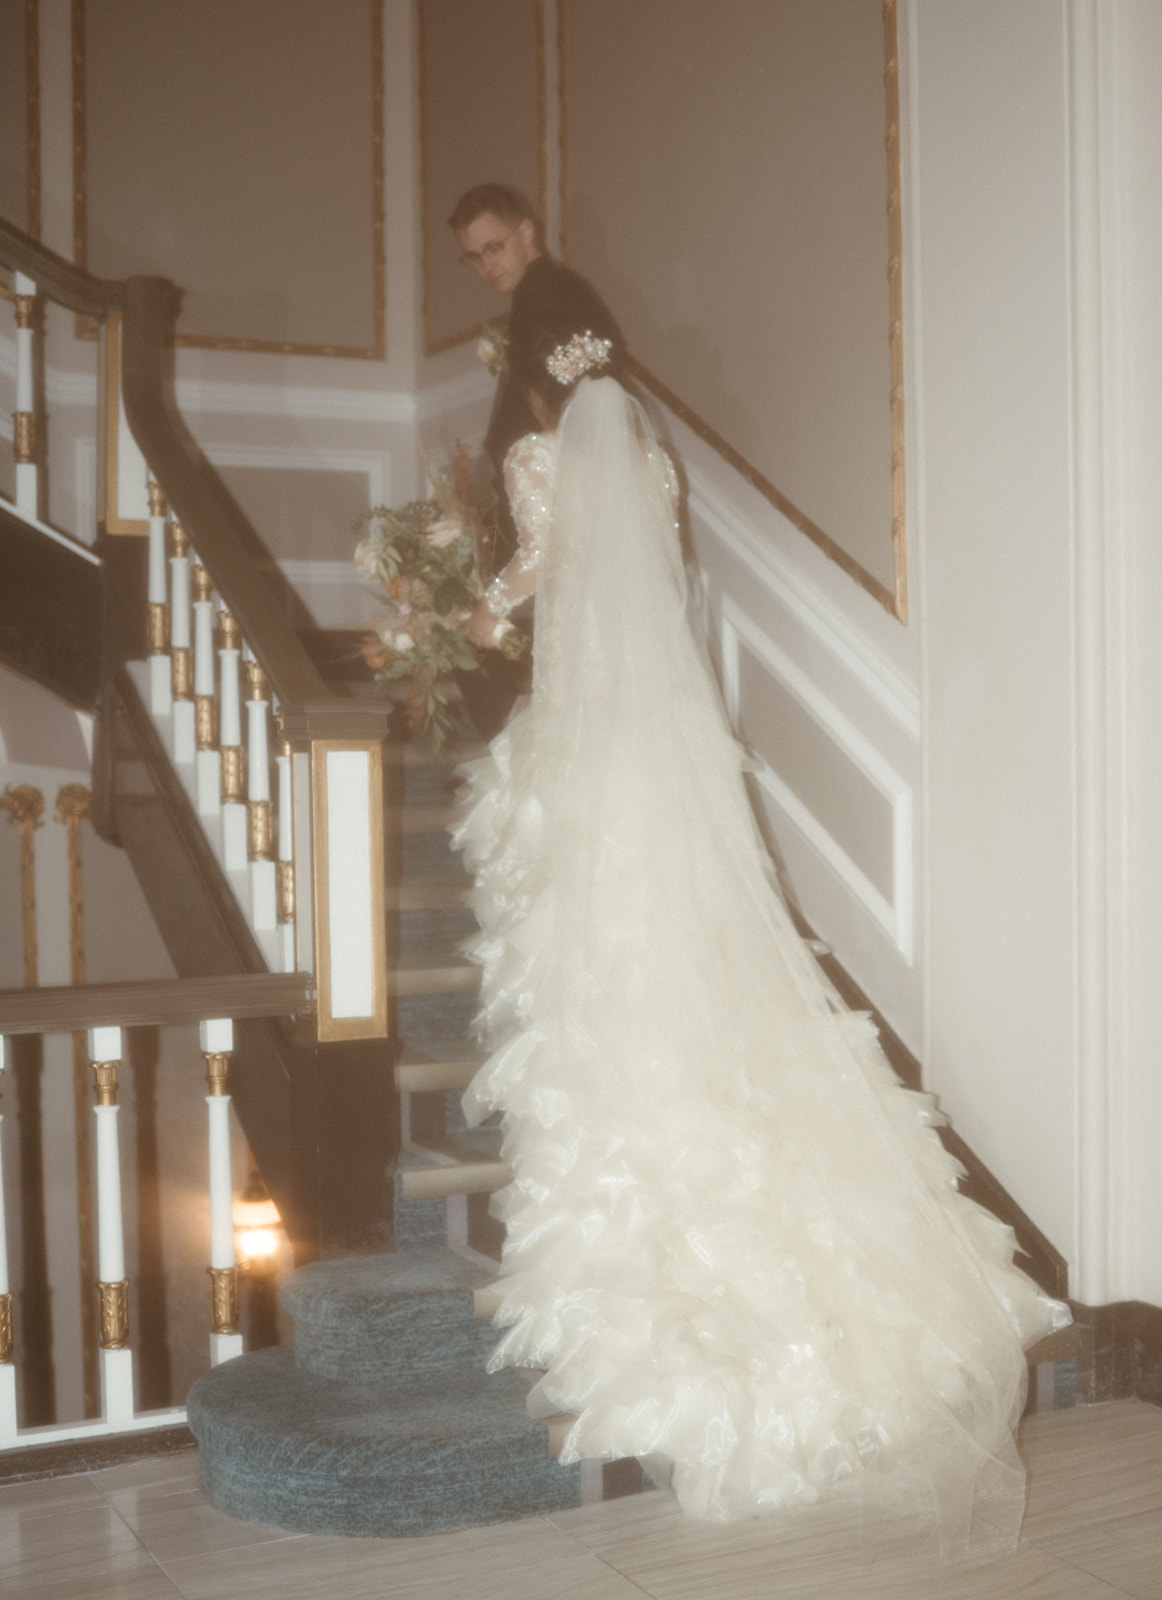 Vintage-inspired film aesthetic, unique wedding photography, ruffled bridal gown